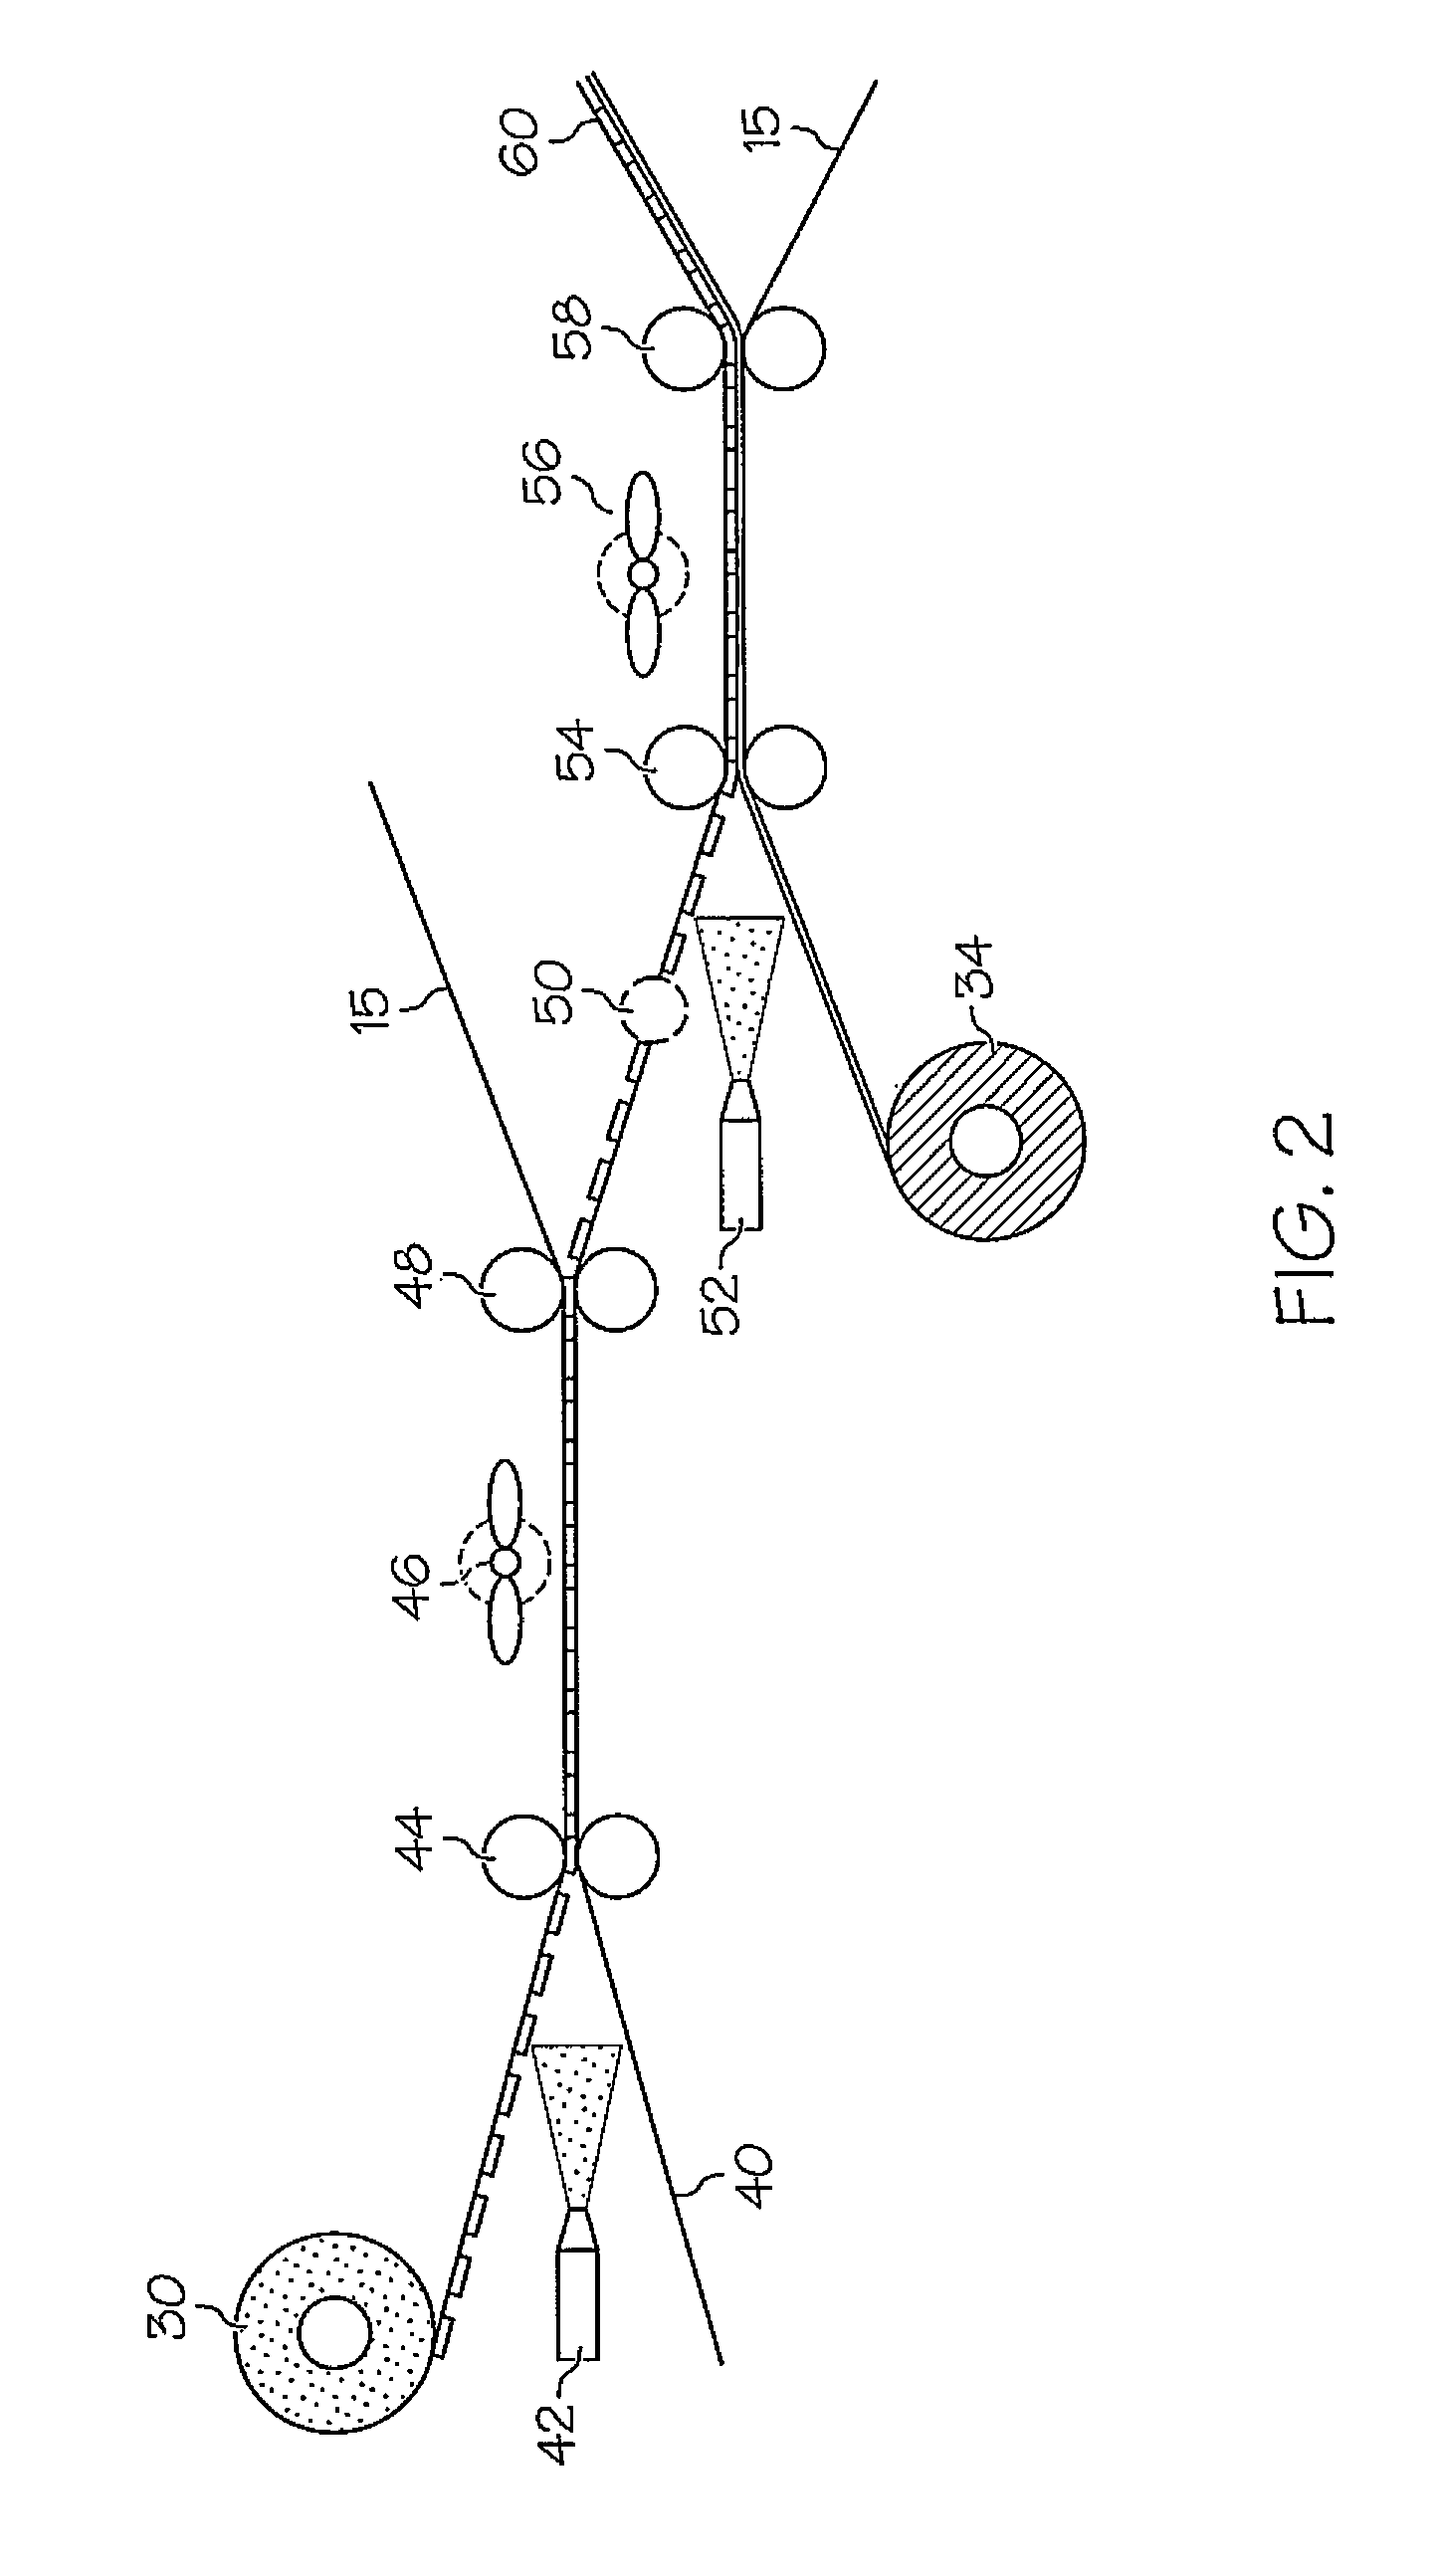 Method of forming layered-open-network polishing pads